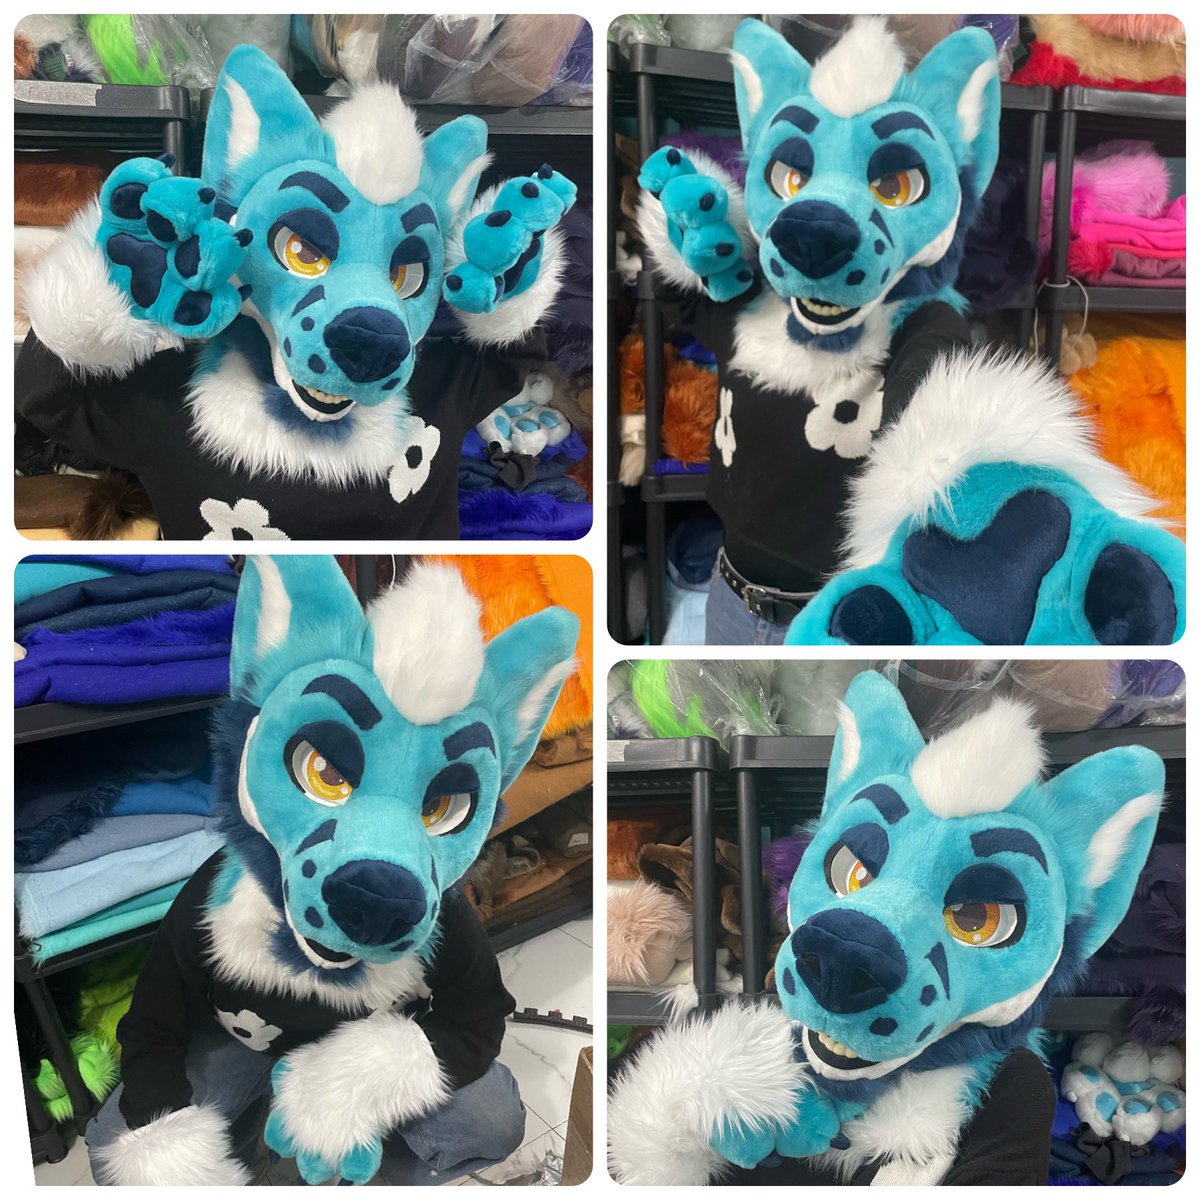 Become a wolf today! Just a reminder this suit is available for 2️⃣1️⃣6️⃣0️⃣USD 

It includes : head , armsleeves, hands and tail and free shipping 
Free TFF pick up 🤙🏻✨

If you're interested in it, please send us a DM. More information below ⬇️⬇️